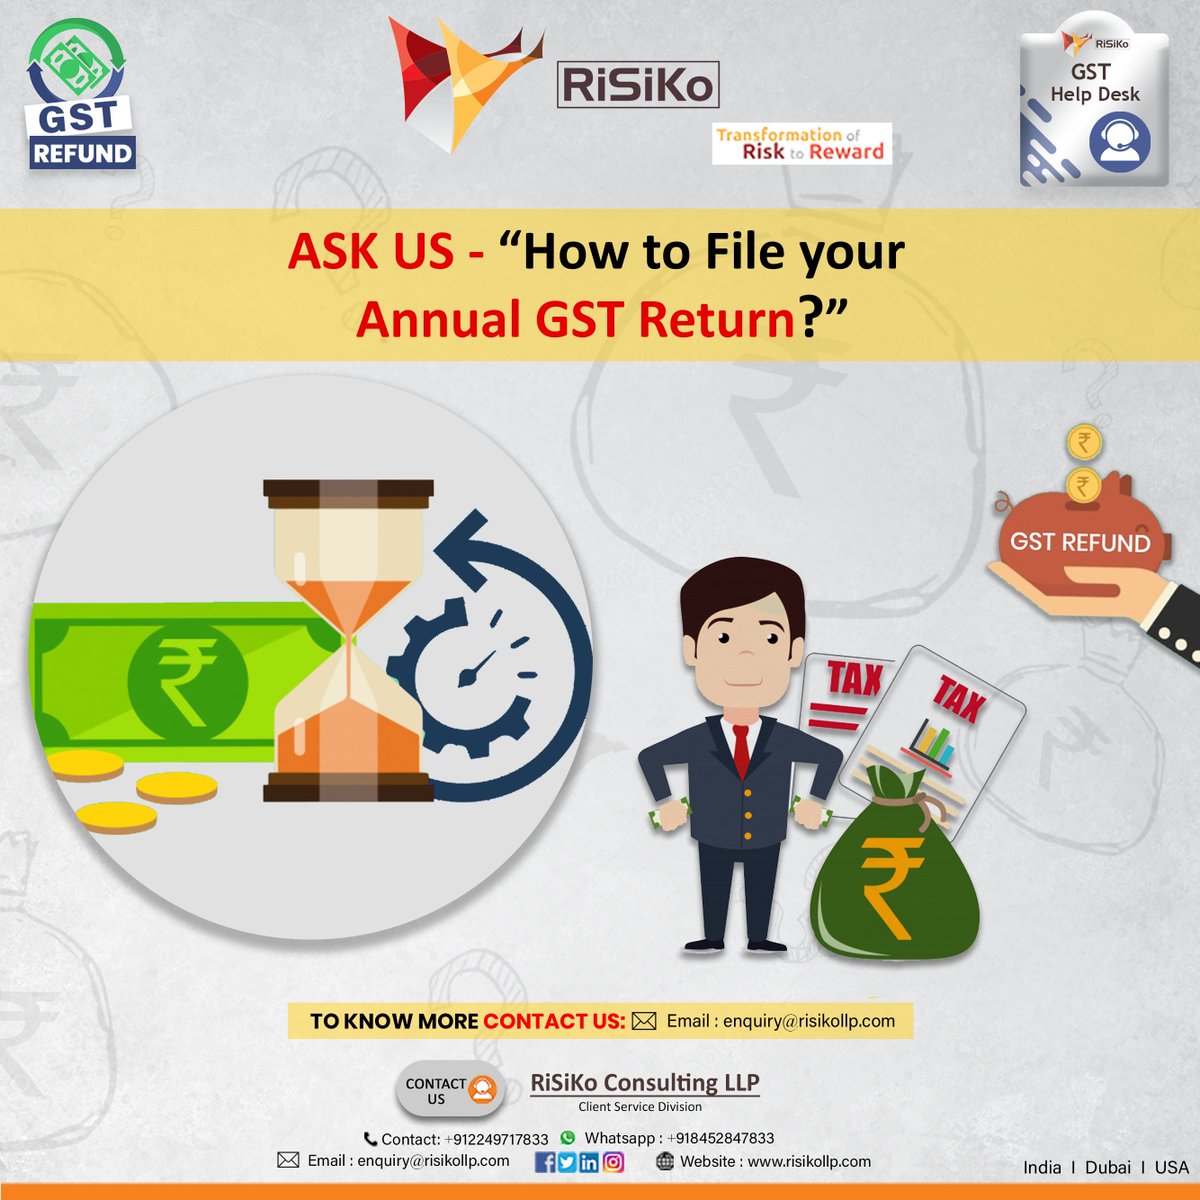 How to file your annual GST Return ?

Contact us-
enquiry@risikollp.com
.
.
.
.
.
#Risikollp #gst #annualgst #return #ca #Consulting #advisory #financial #accounting #returnfiling #business #management #startup #crsisimanagement #foresenic #newstartup #india